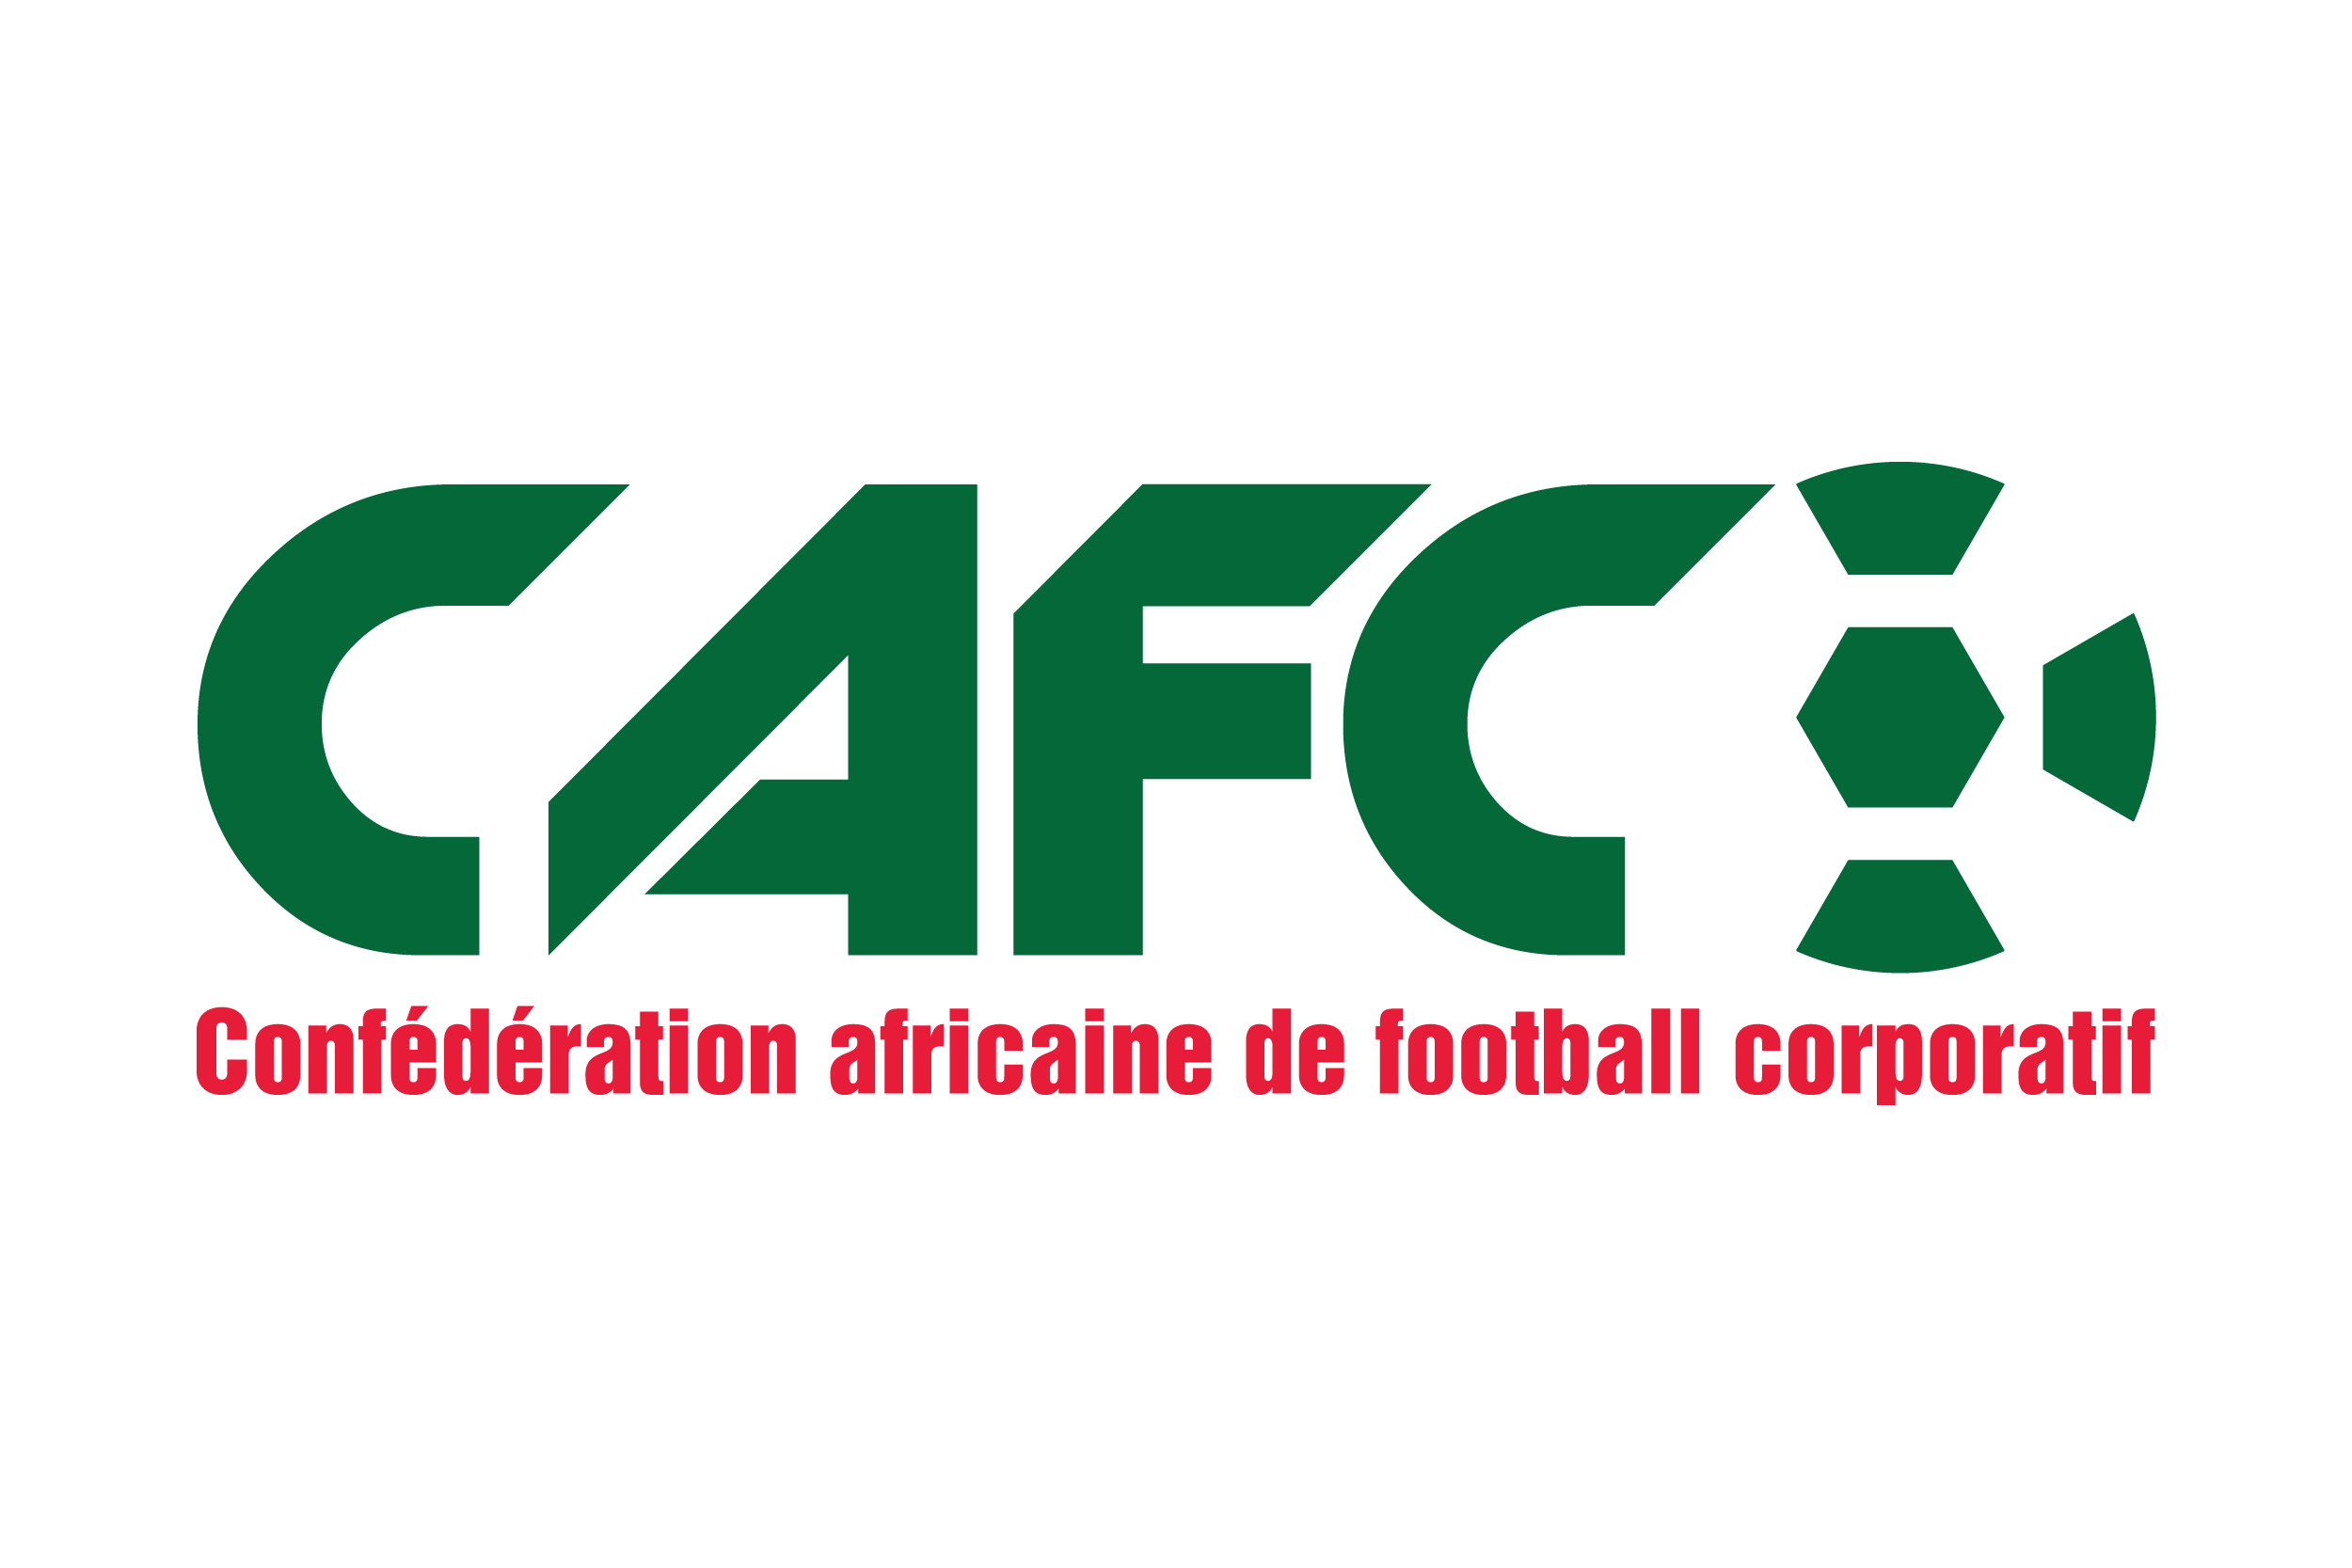 Confederation of African Corporate Football